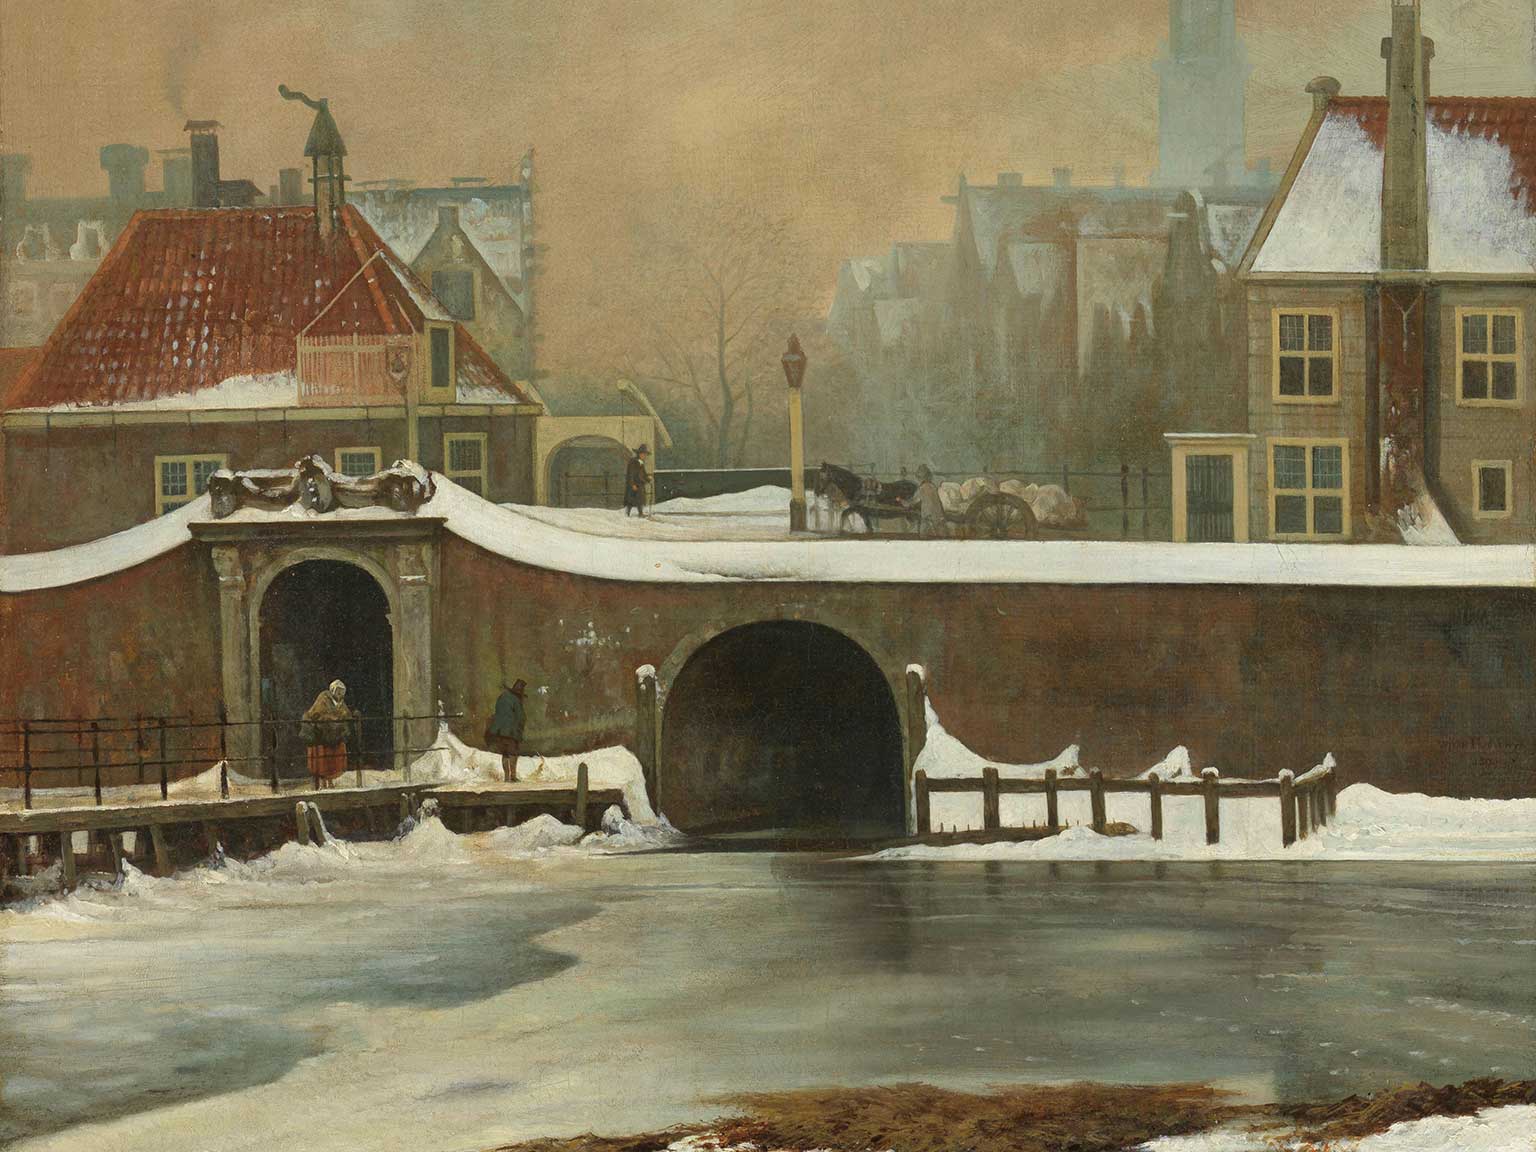 Raampoort, Amsterdam, detail of a painting from 1809 by Wouter Johannes van Troostwijk